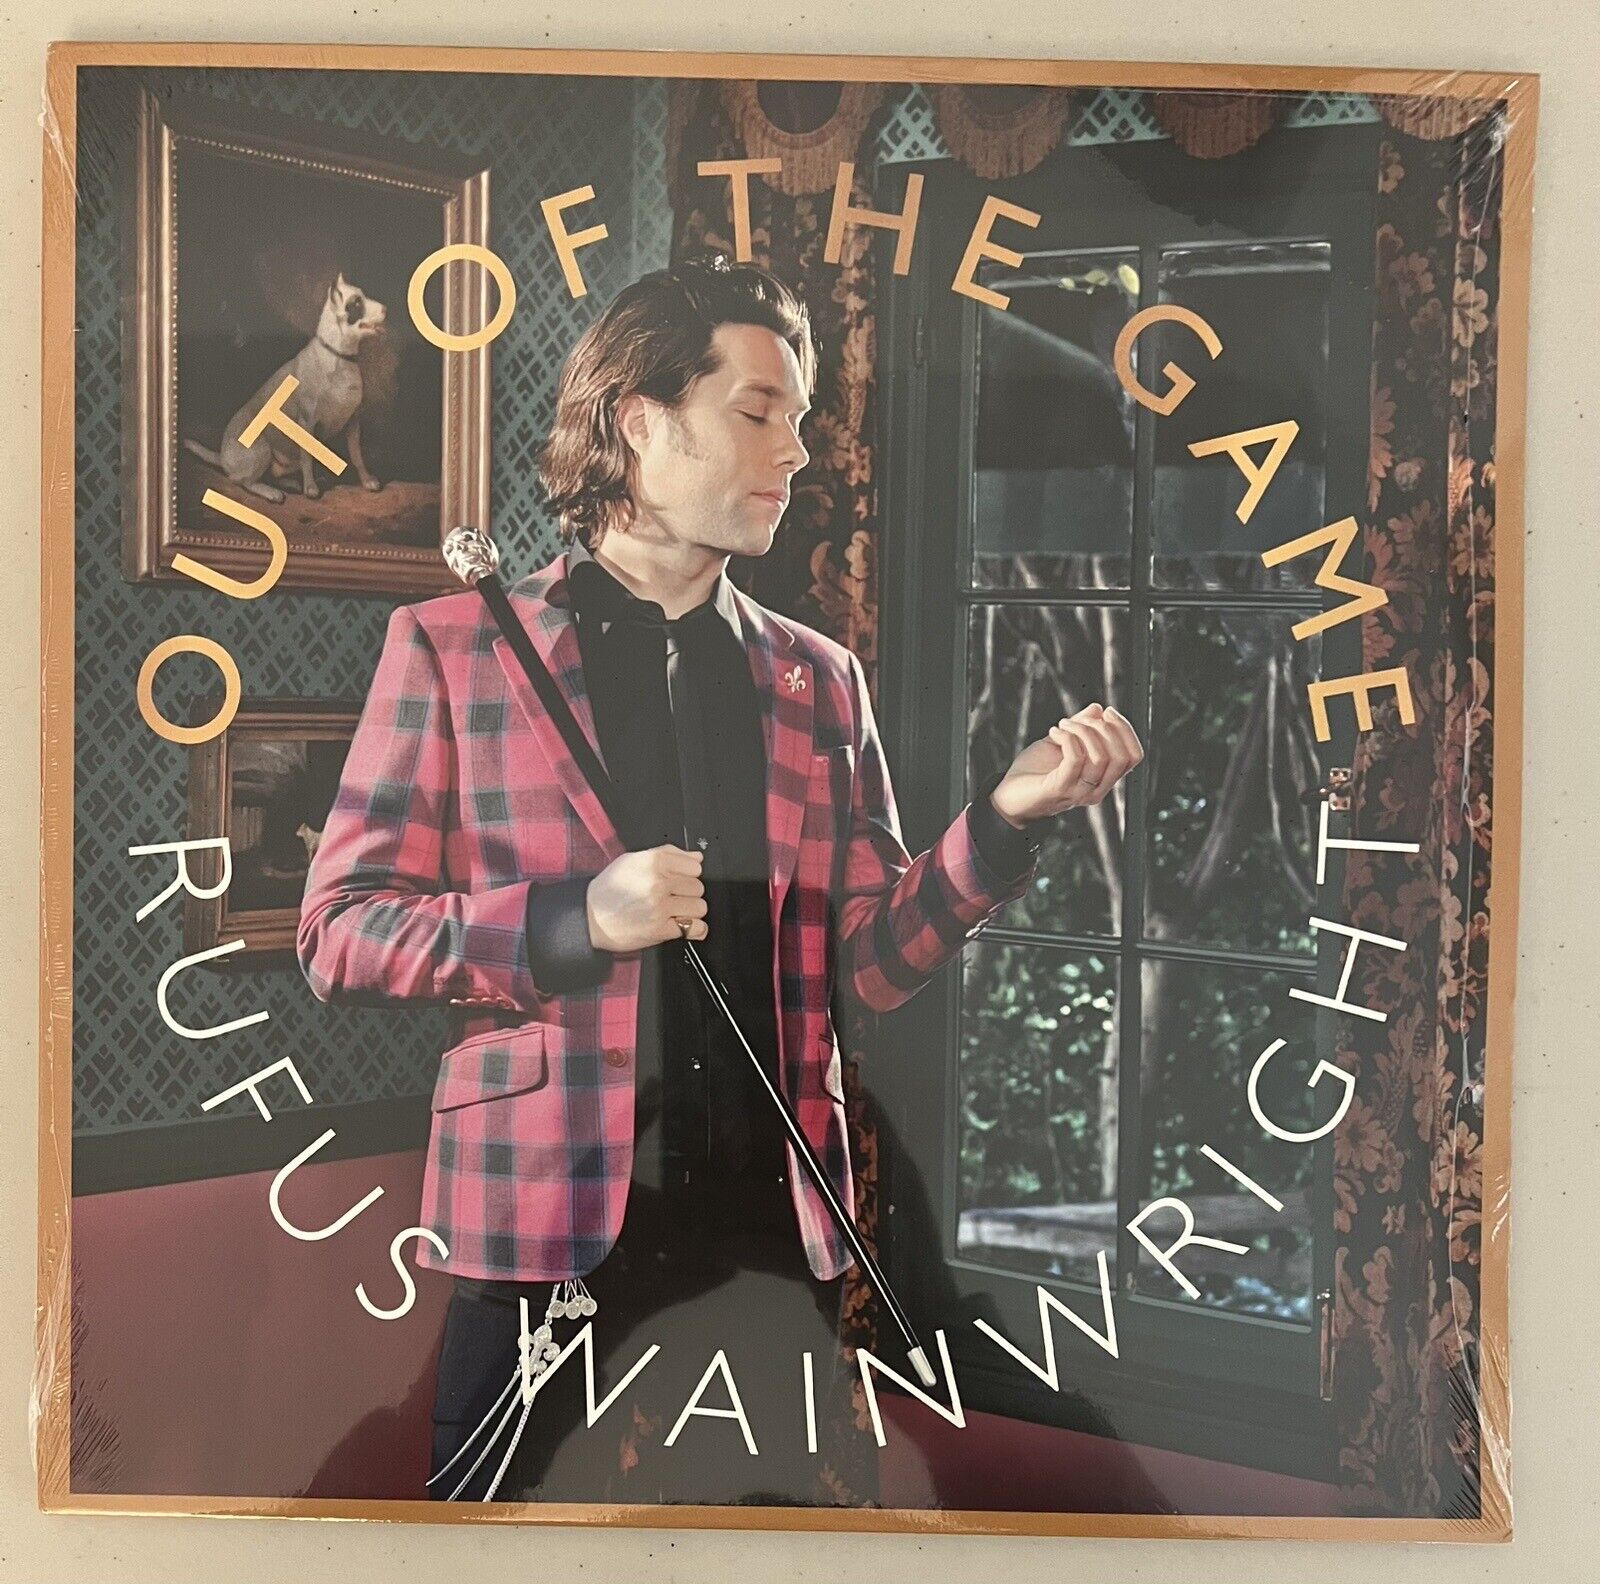 Out of the Game by Rufus Wainwright (Record, 2012) New Vinyl LP